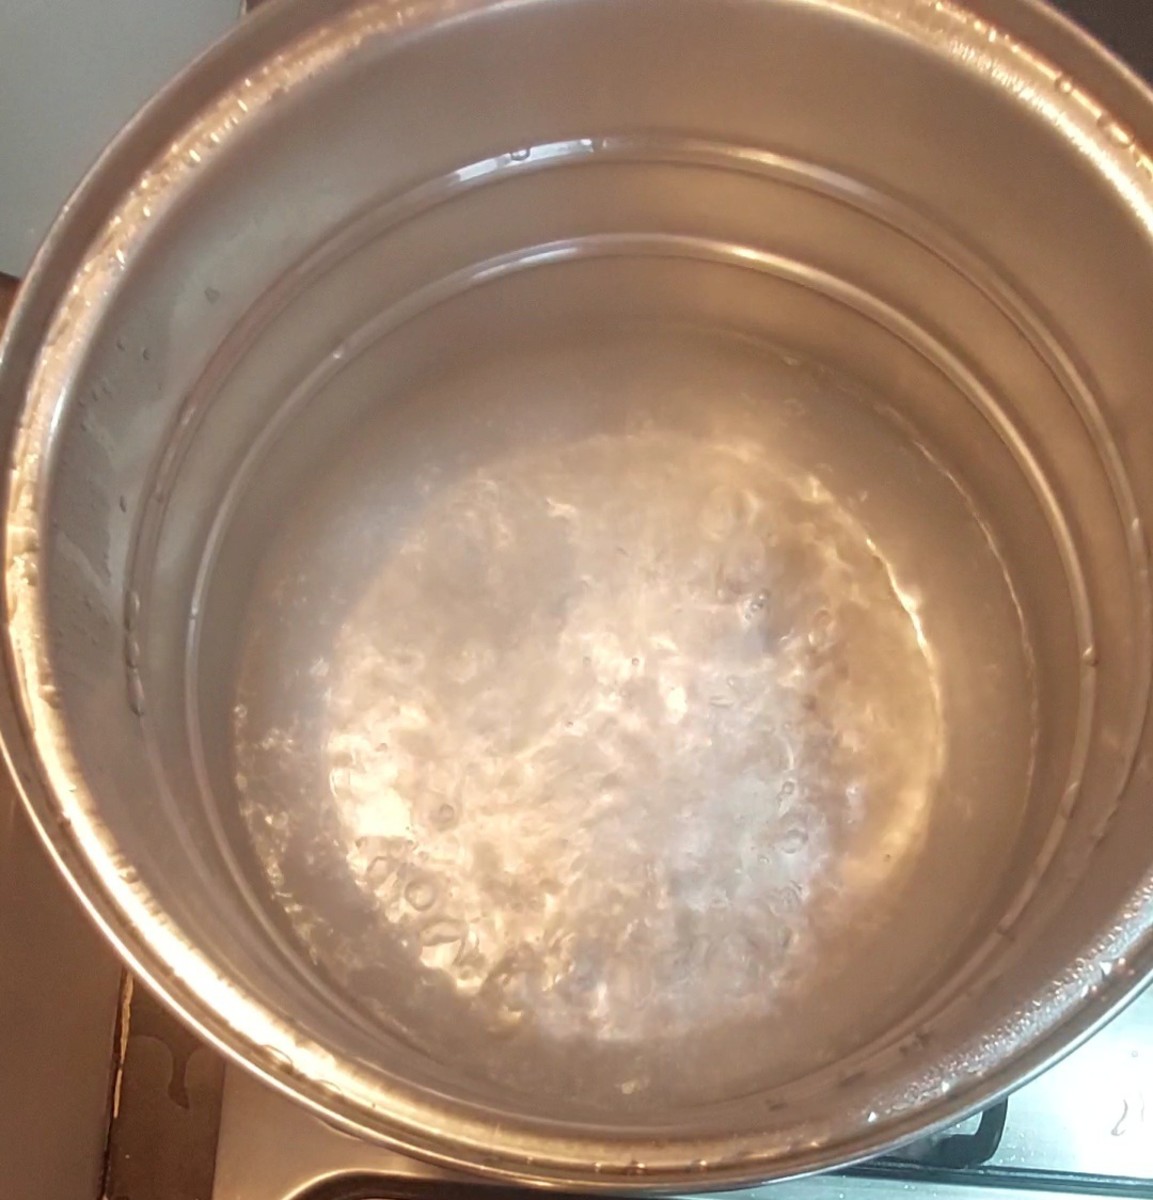 Keep water for boiling in idli steamer.